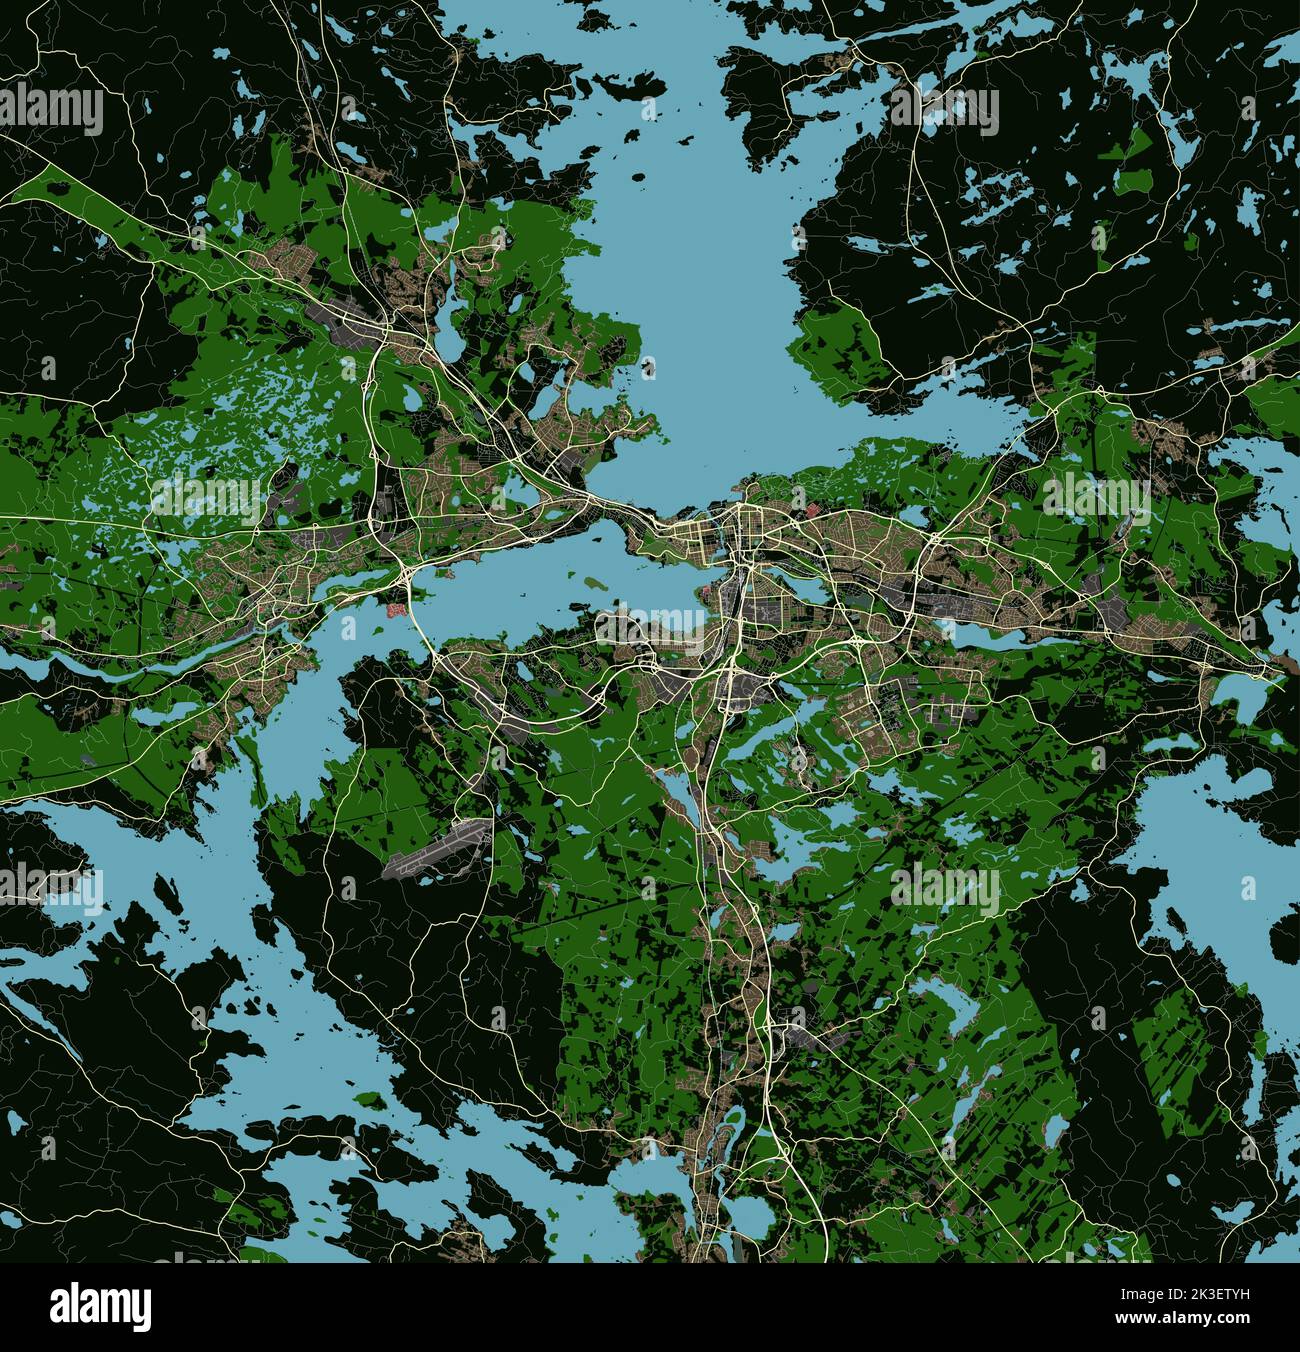 City map of Tampere Finland Vector Stock Vector